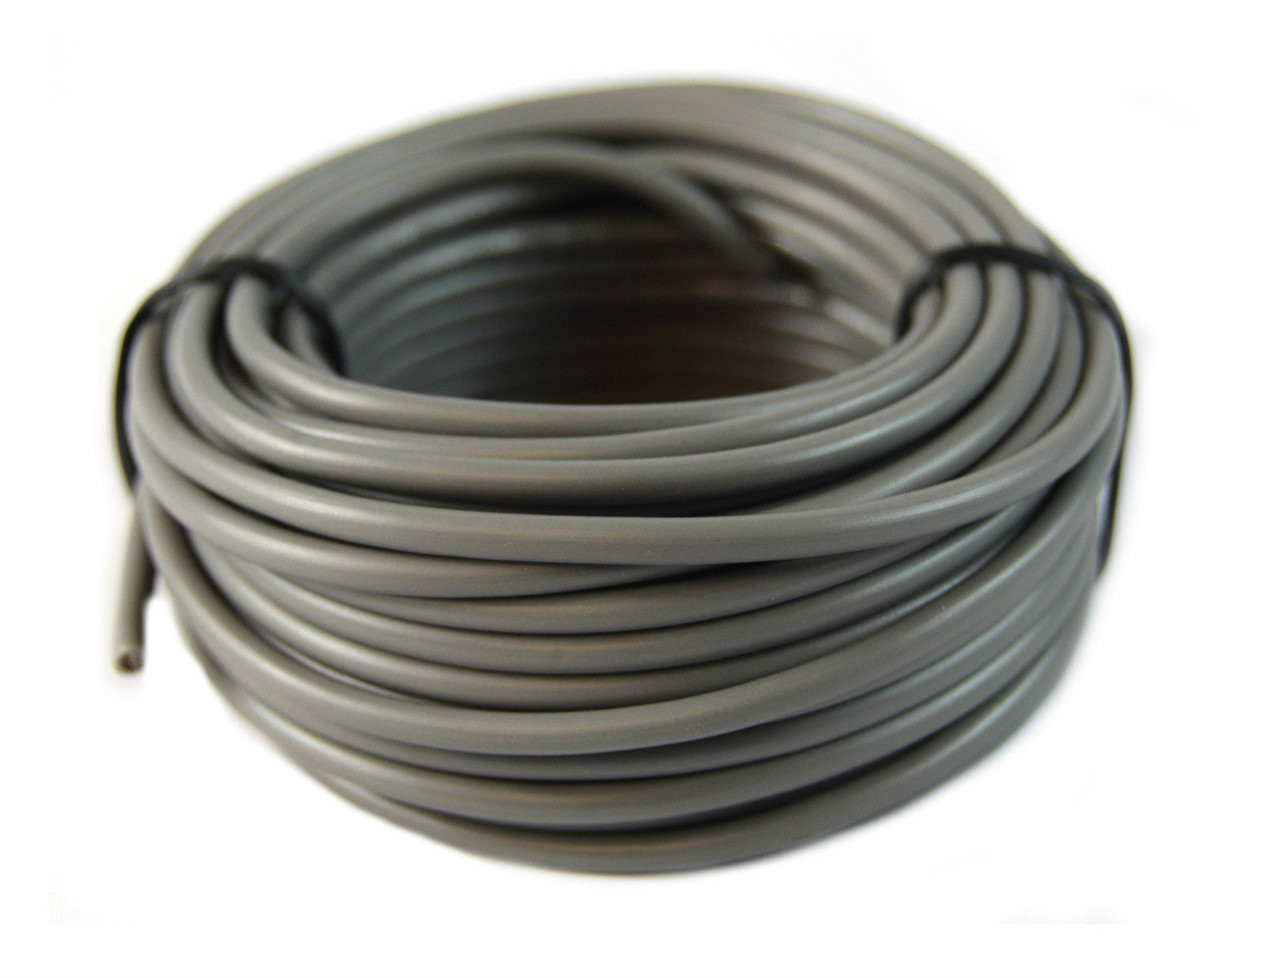 Prestolite military 14 gauge electrical wire roll - 25', 50', 100', 82